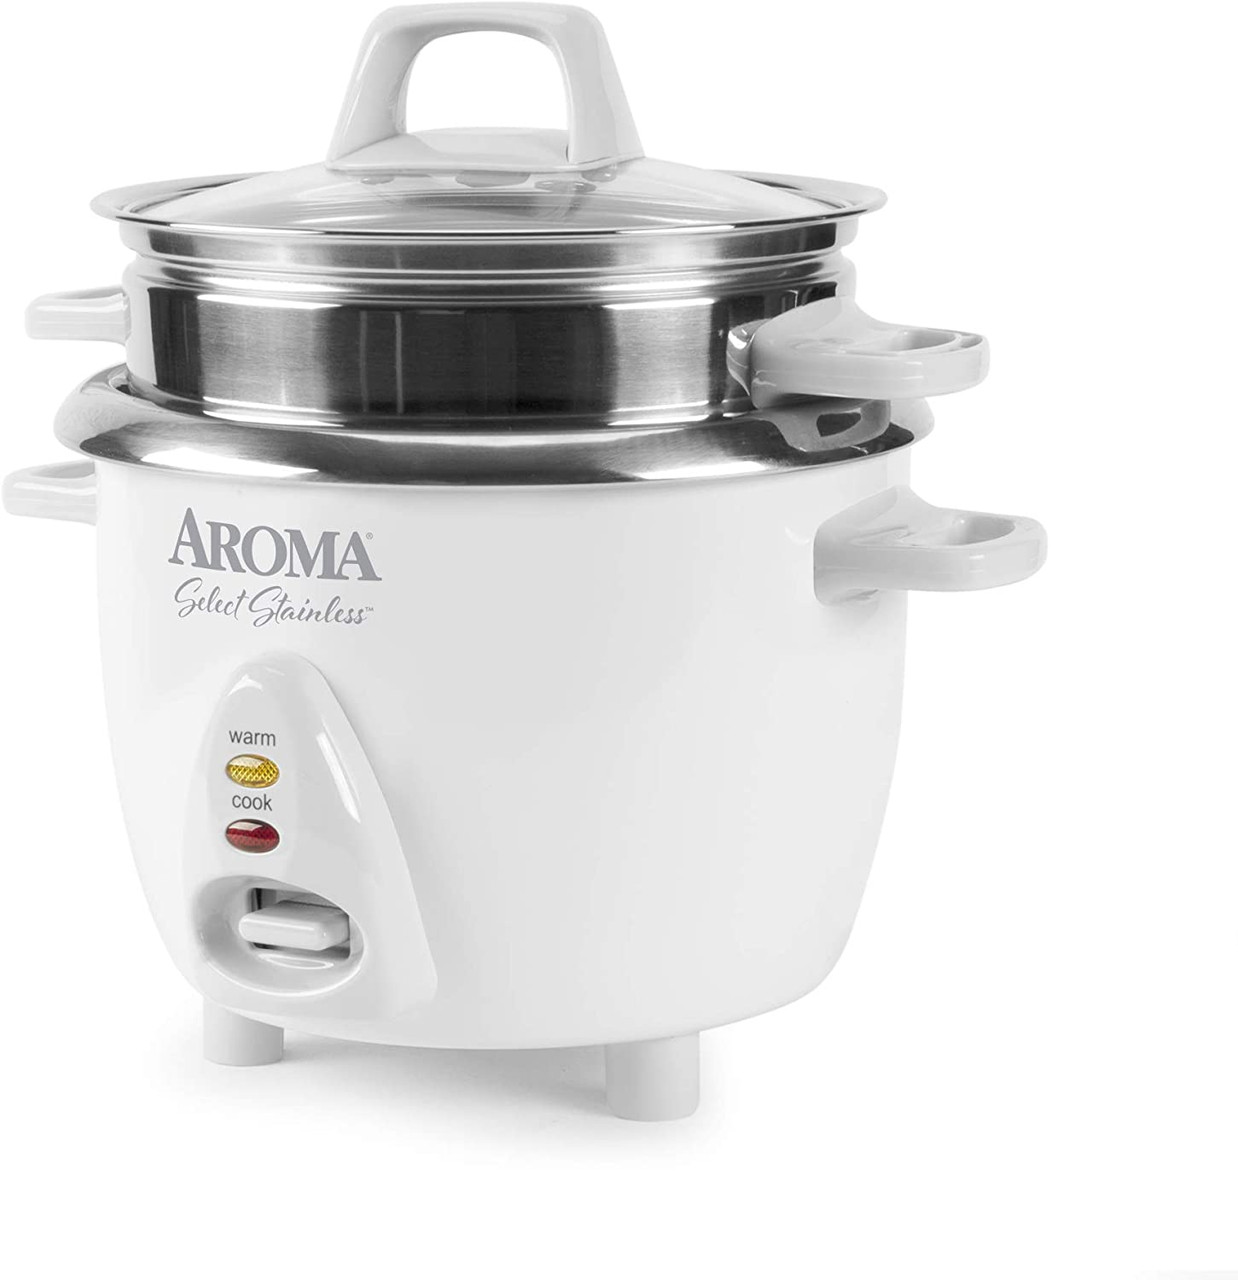  Aroma Housewares ARC-360-NGP 20-Cup Pot-Style Rice Cooker &  Food Steamer, White: Home & Kitchen